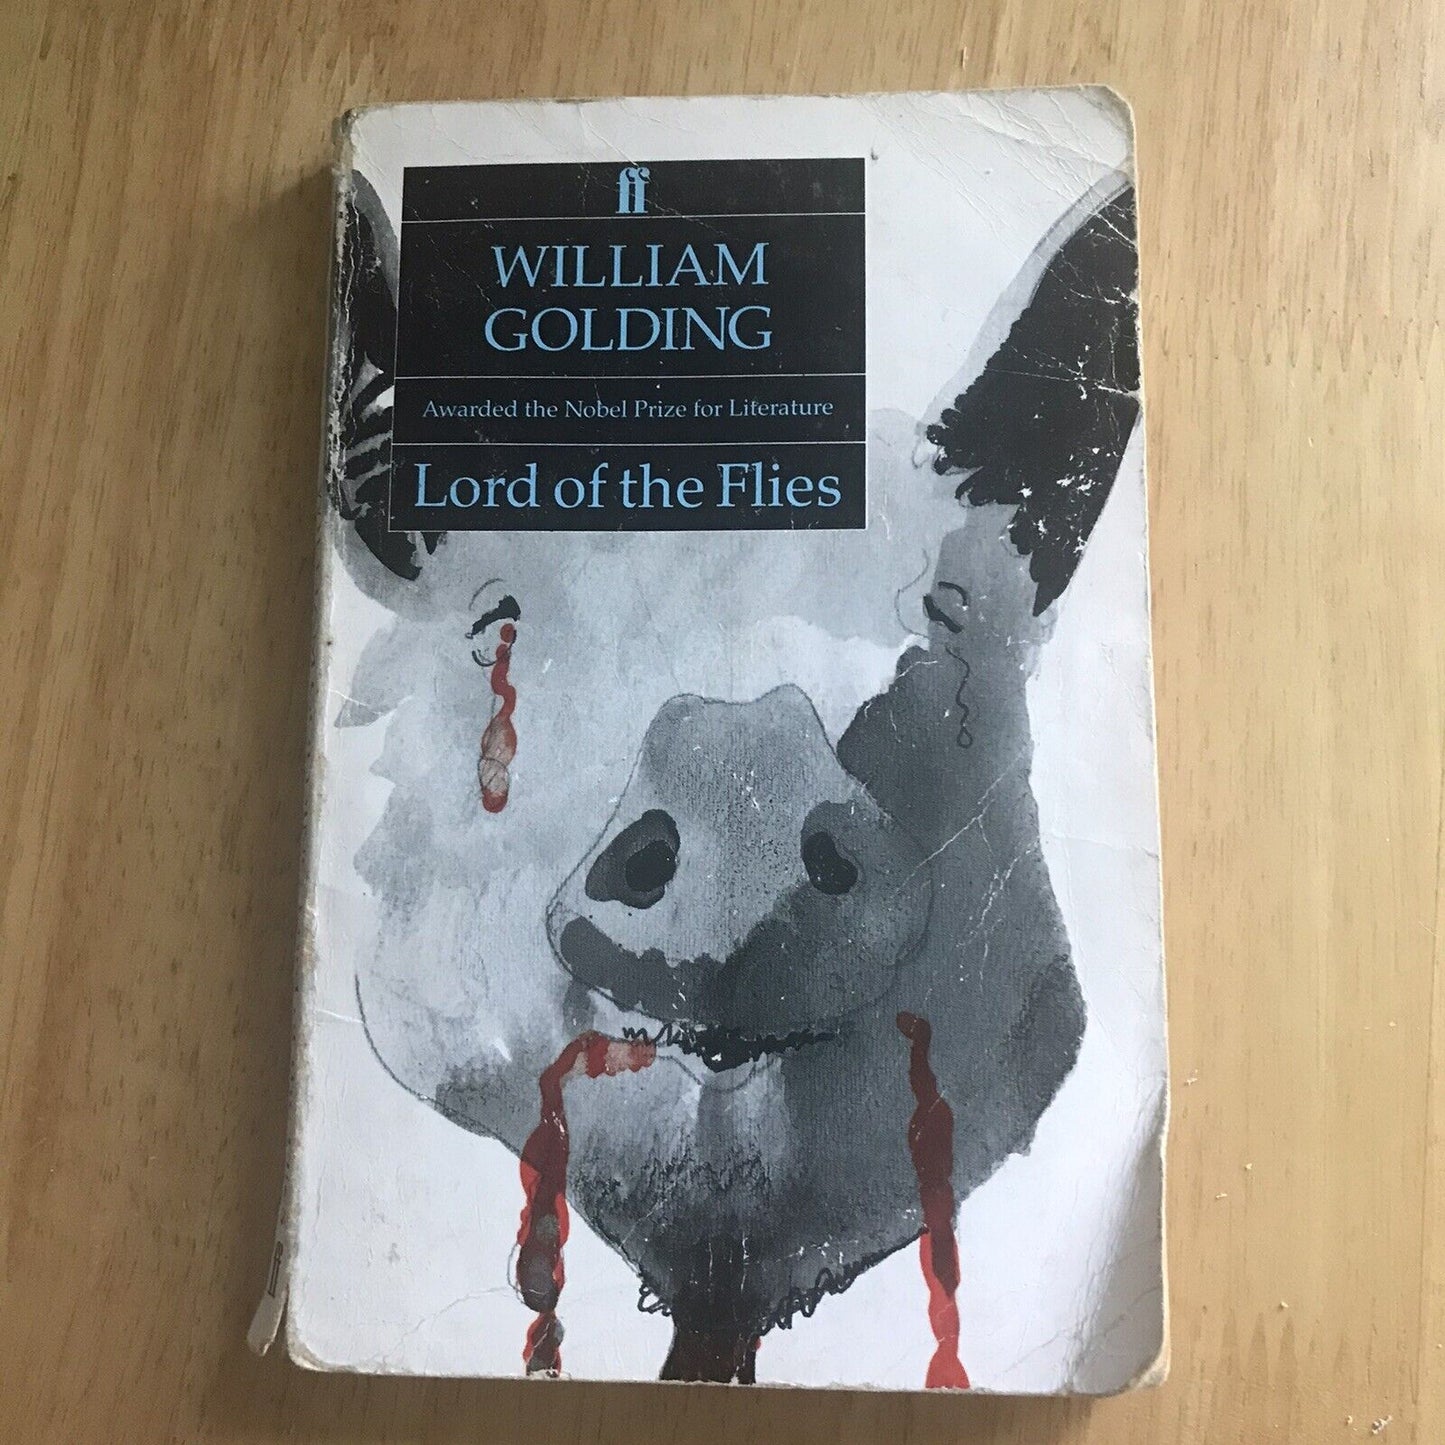 Lord of the Flies by William Golding (Paperback, 1973)